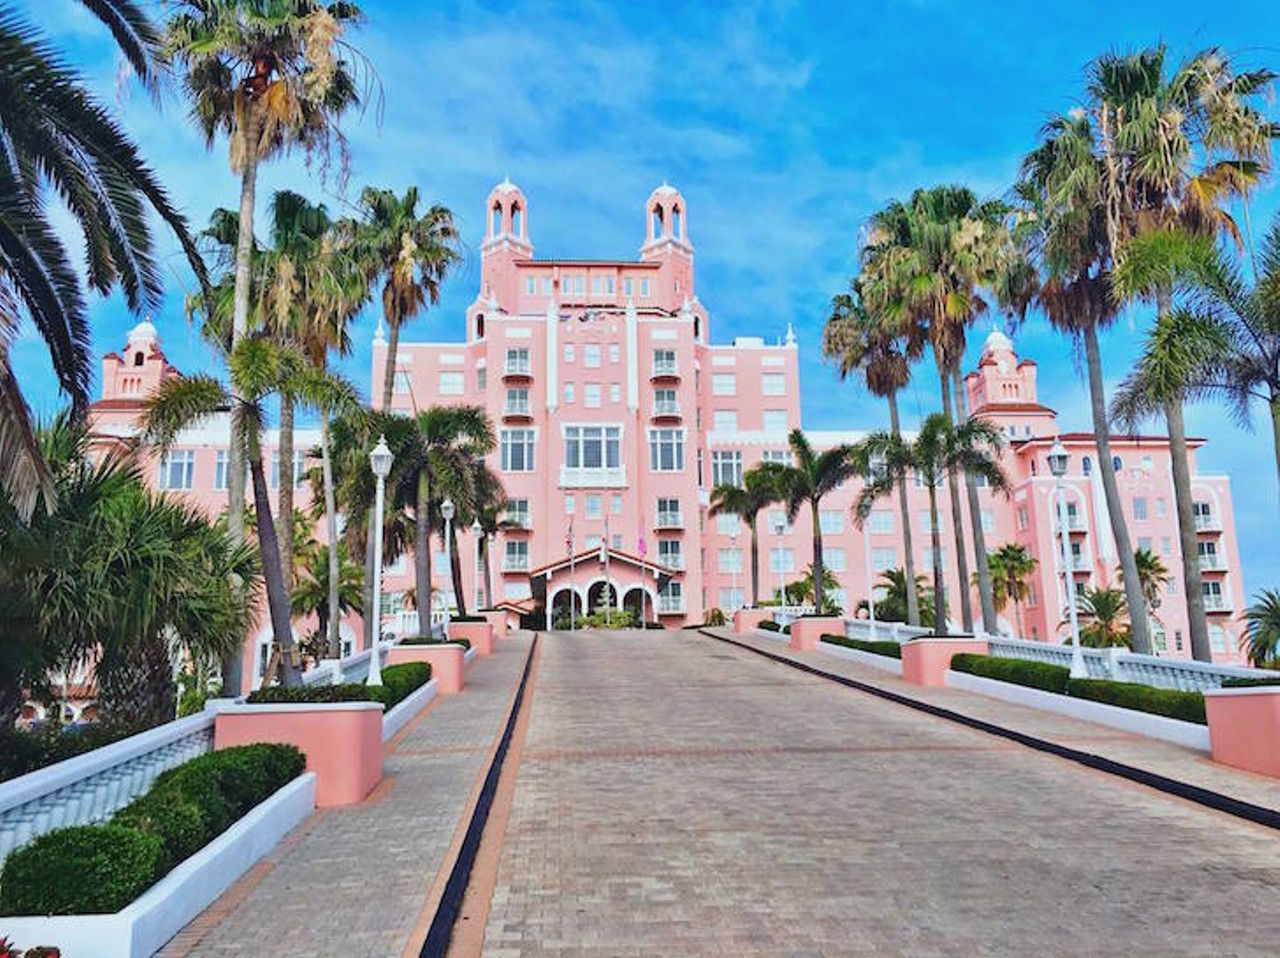  Don CeSar     
3400 Gulf Blvd, St Pete Beach, FL 33706, (727) 360-1881
It&#146;s no brainer that this massive pink palace on St. Pete beach has a beautiful everything, including three bars&#150;&#150;an elegant lobby bar, Rowe Bar, and the beachfront Beachcomber bar. Each of these bars offers a step into the lavish life of the Don CeSar. Grab a cocktail and relax on their private beach. 
Photo via  Don CeSar/Facebook